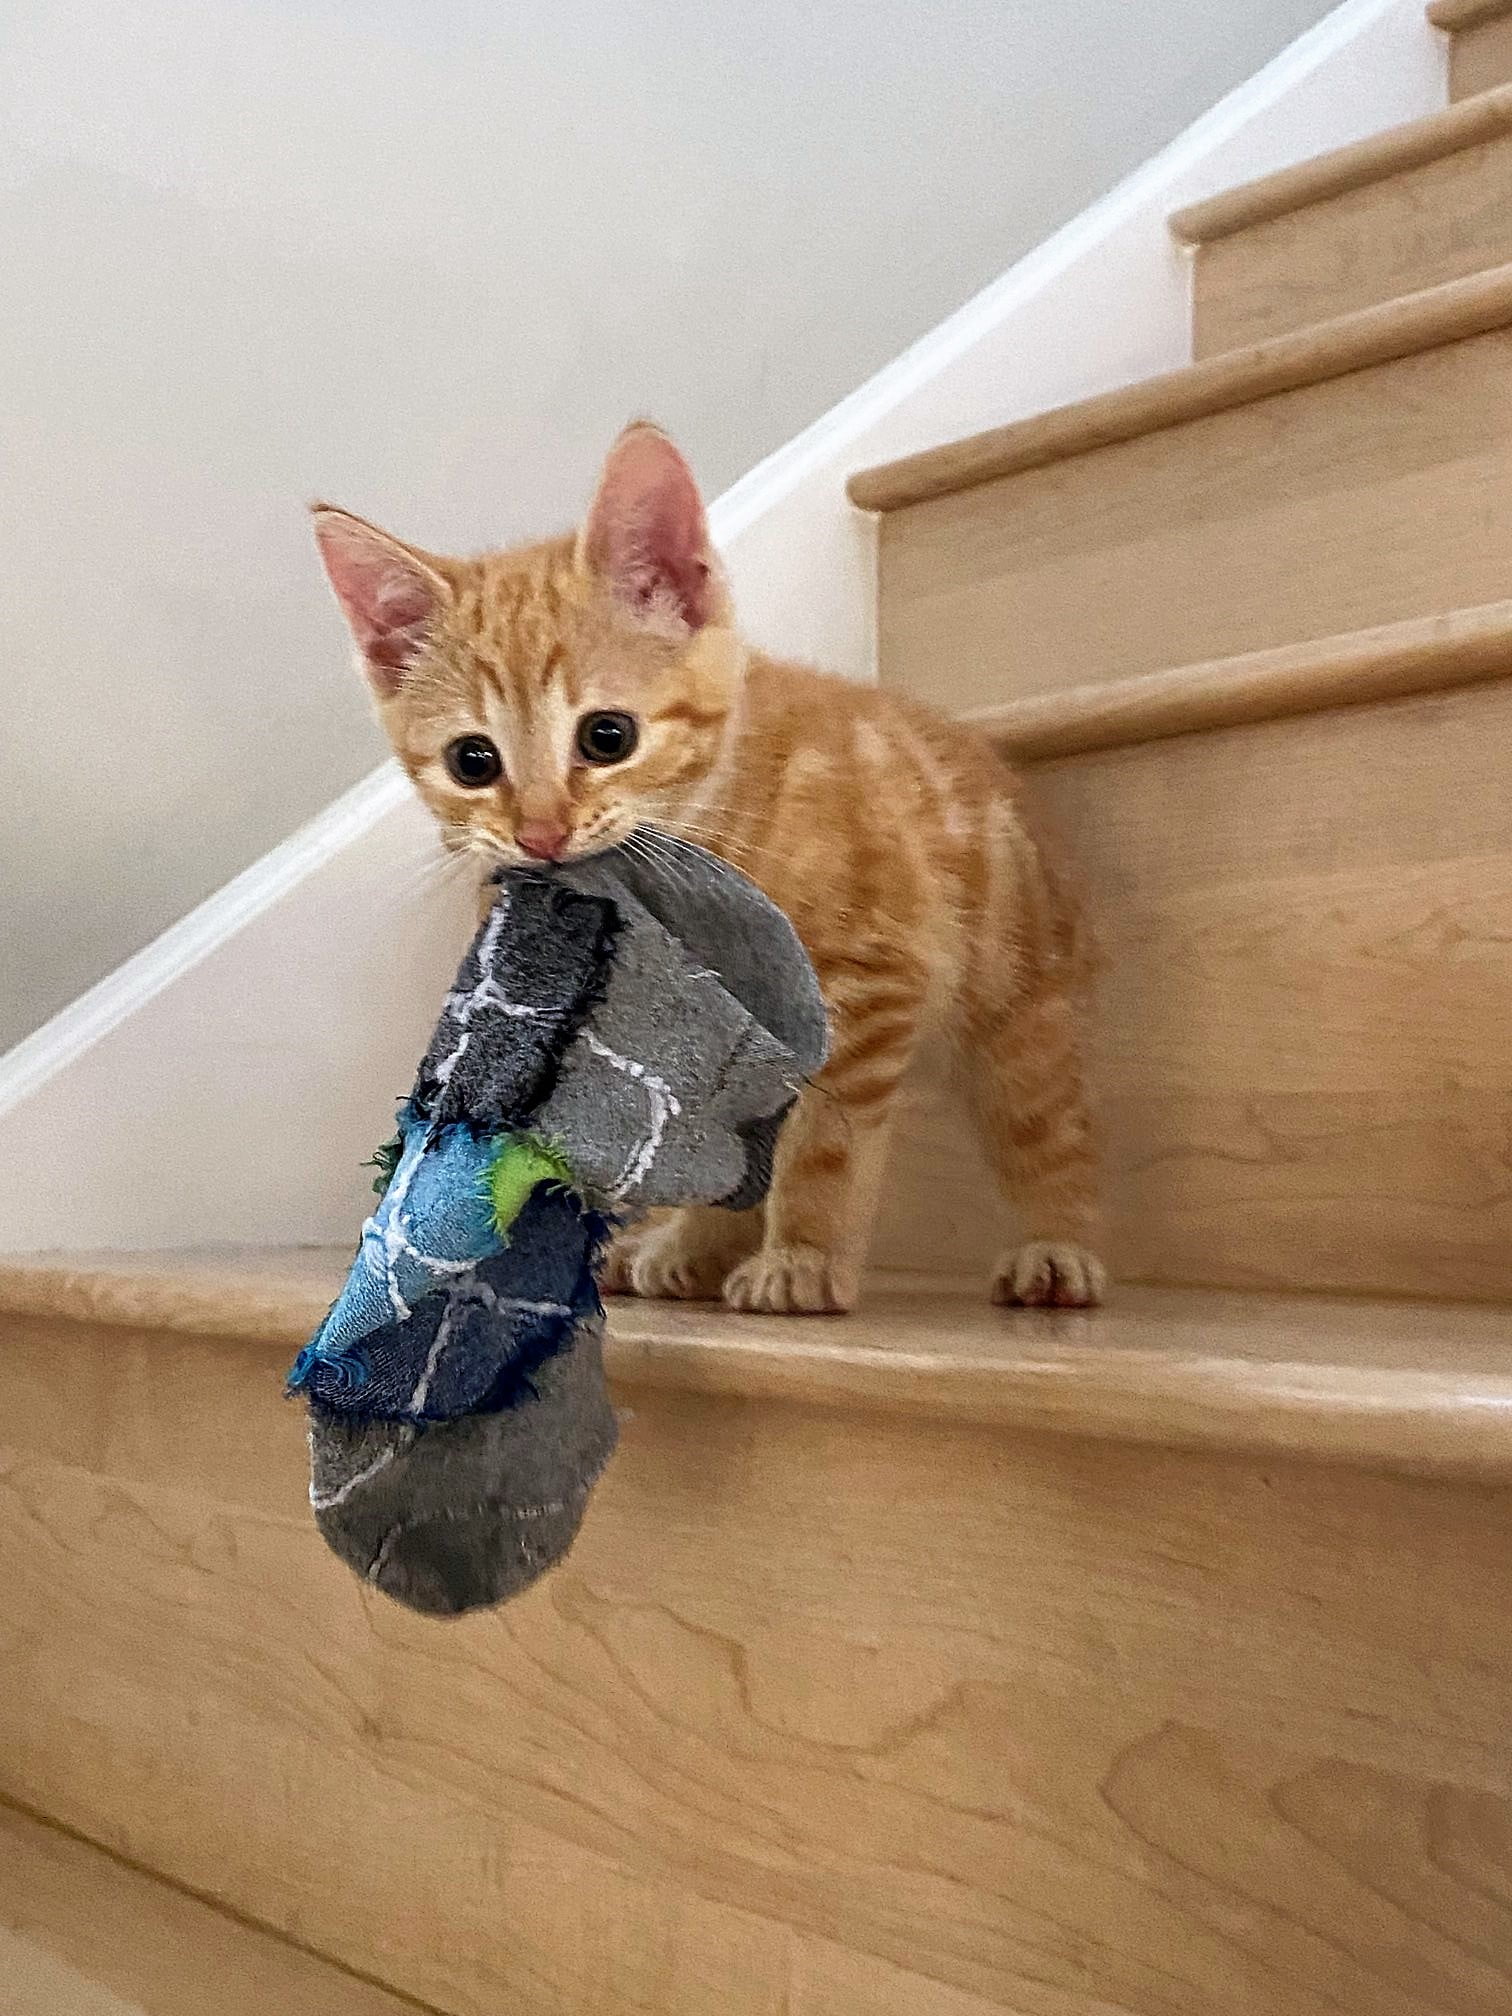 Kitten kills a tired beat-up sock and brings it into the den